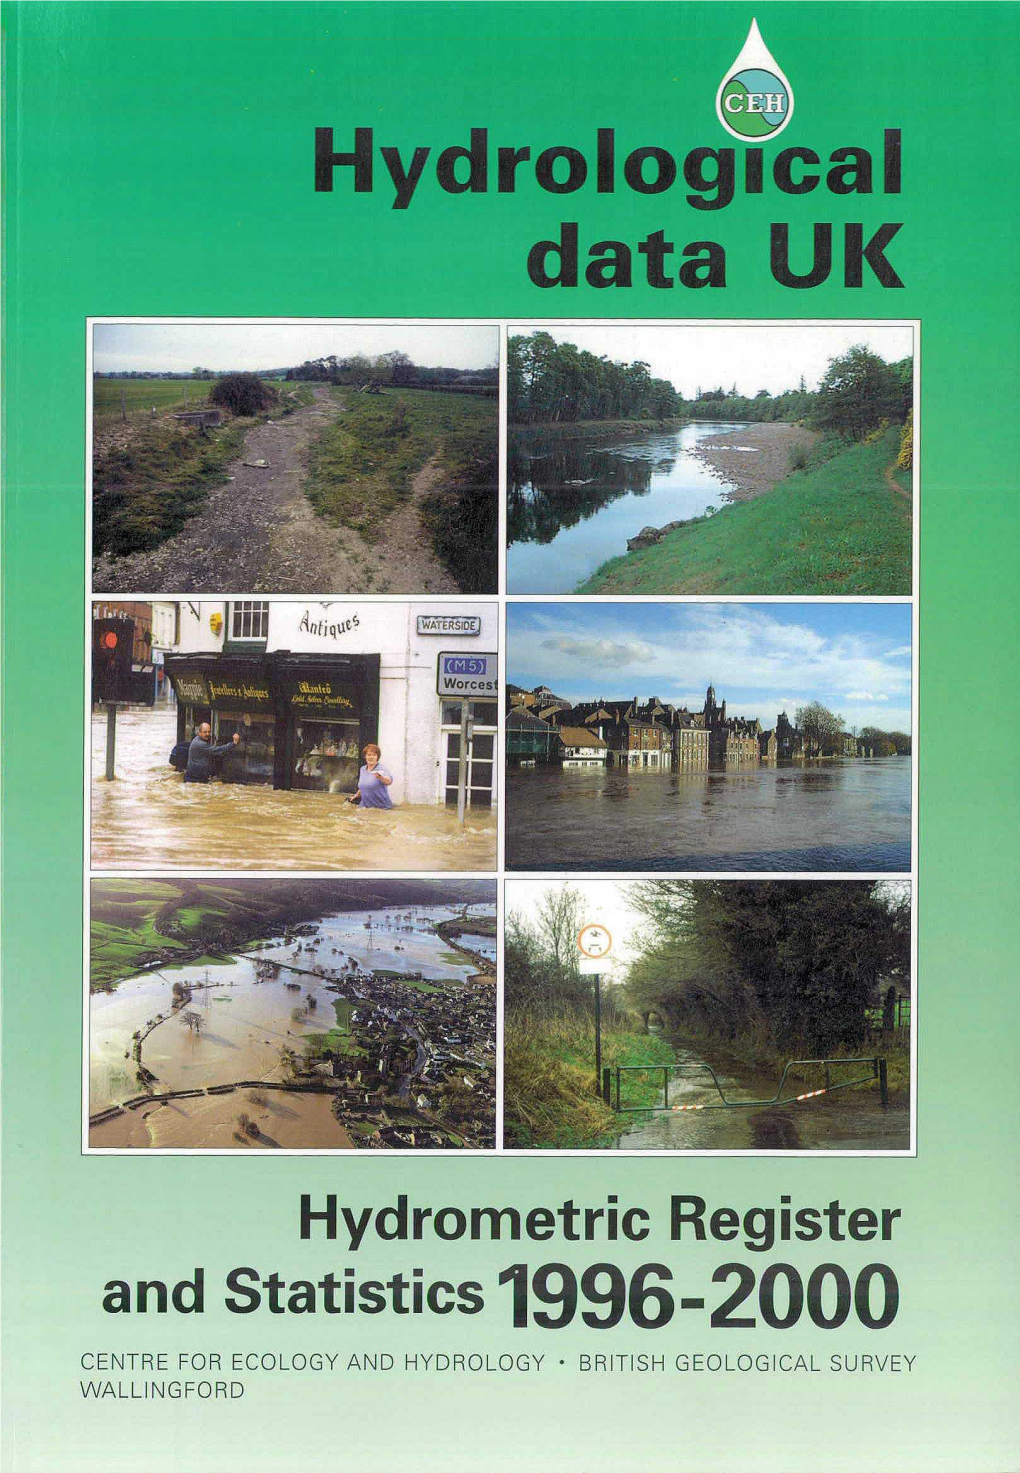 Hydrometric Register and Statistics1996-2000 CENTRE for ECOLOGY and HYDROLOGY • BRITISH GEOLOGICAL SURVEY WALLINGFORD Á HYDROLOGICAL DATA UNITED KINGDOM